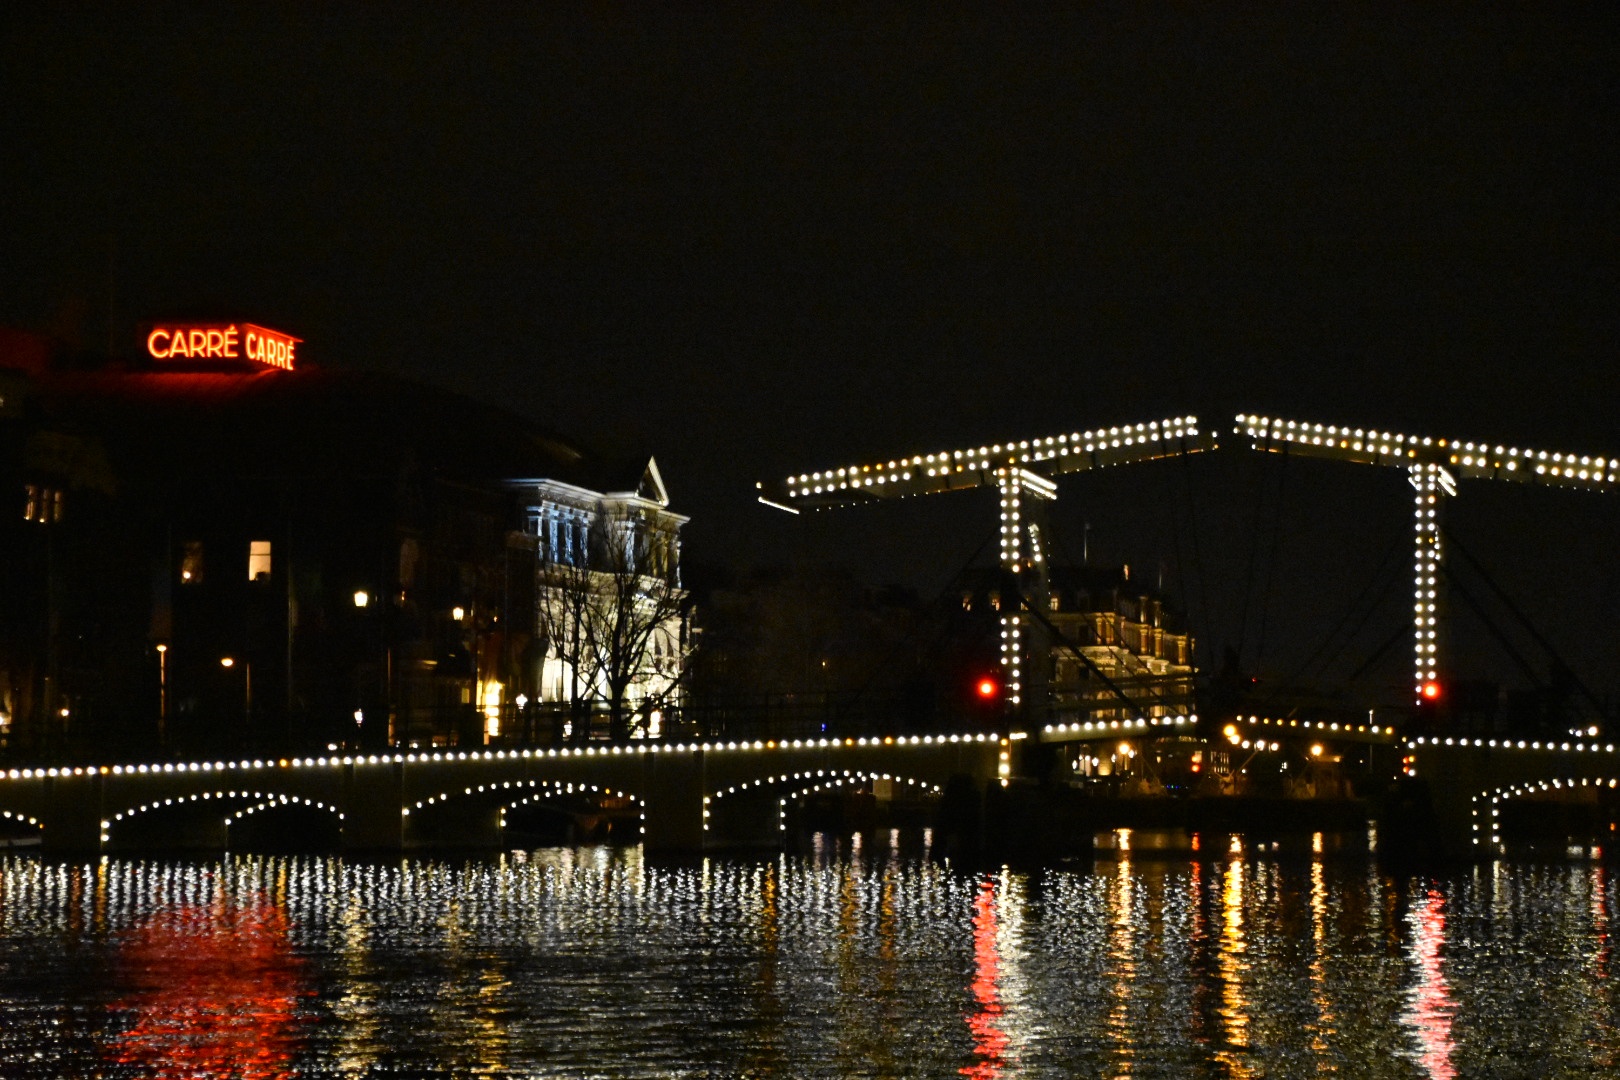 Canal Cruise by Night in Amsterdam